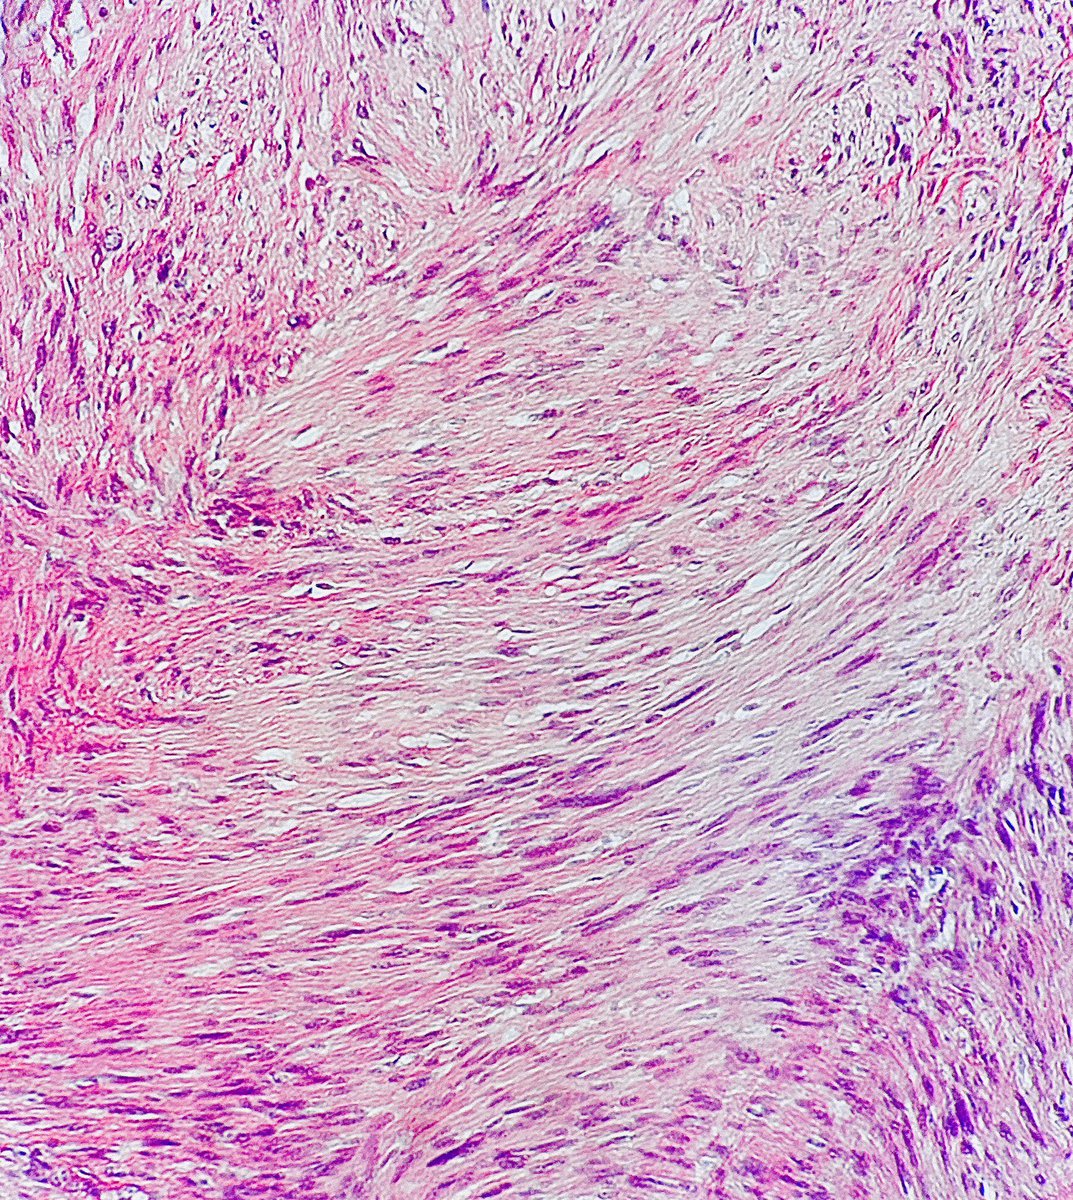 Neurofibroma

•Benign nerve sheath tumor
•Neoplastic cell is schwann cell (other associated cells- perineurial and stromal cells)
•Subtypes: ancient, cellular, atypical, plexiform👇 
•Plexiform is multinodular, look like “bag of worms”, ass w NF1+risk of MPNST transformation